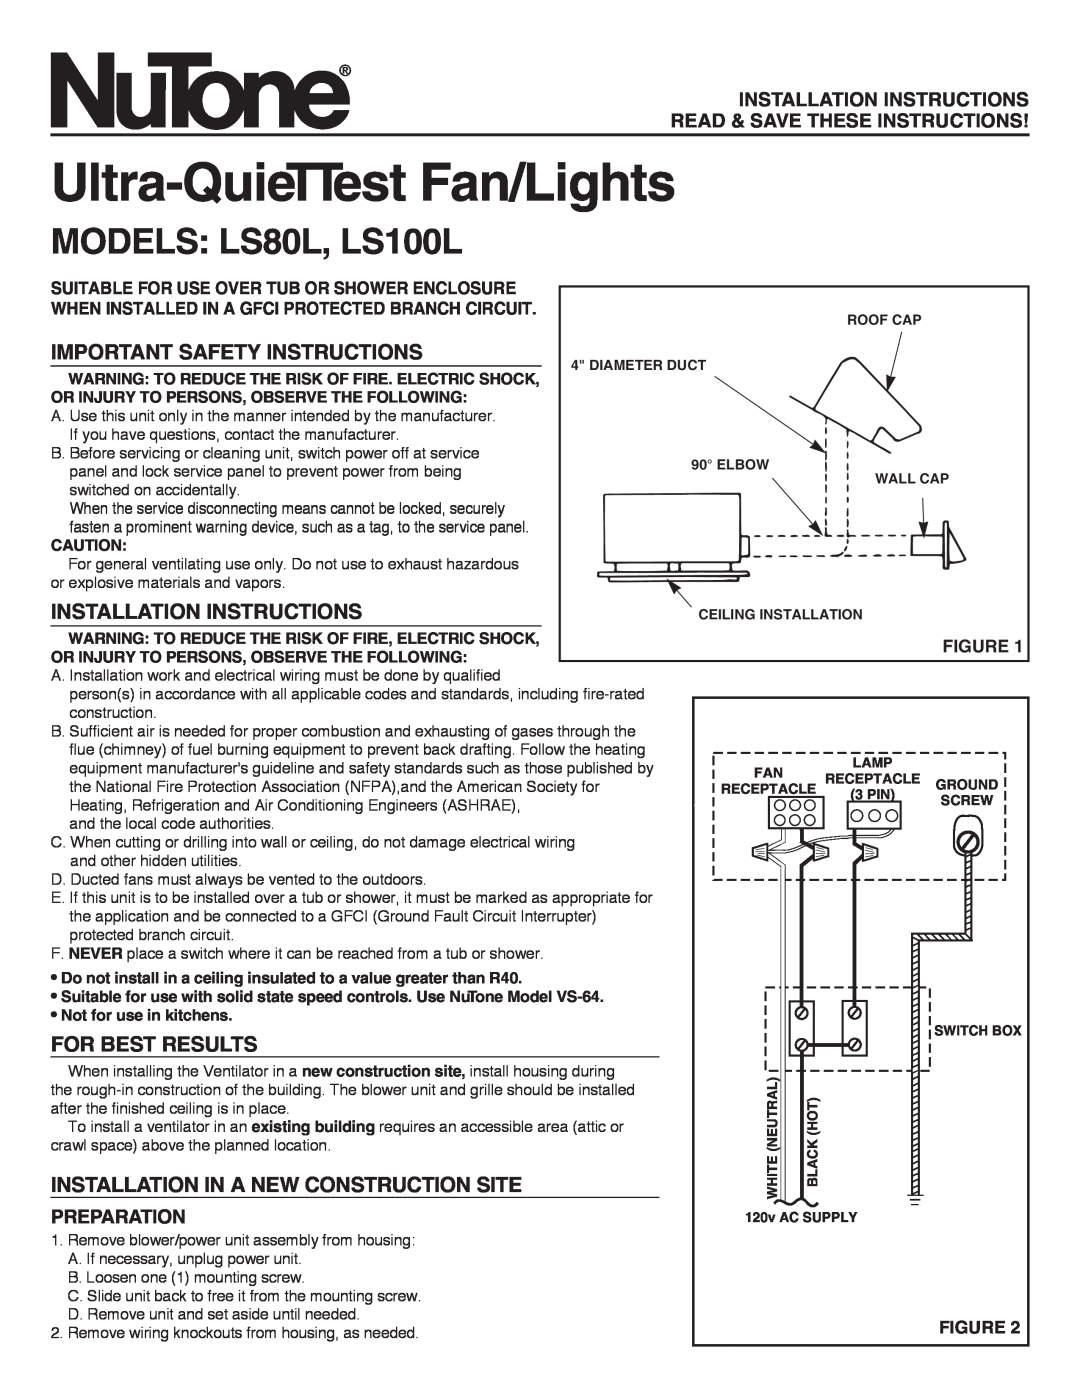 NuTone important safety instructions Ultra-QuieTTestFan/Lights, MODELS LS80L, LS100L, Important Safety Instructions 